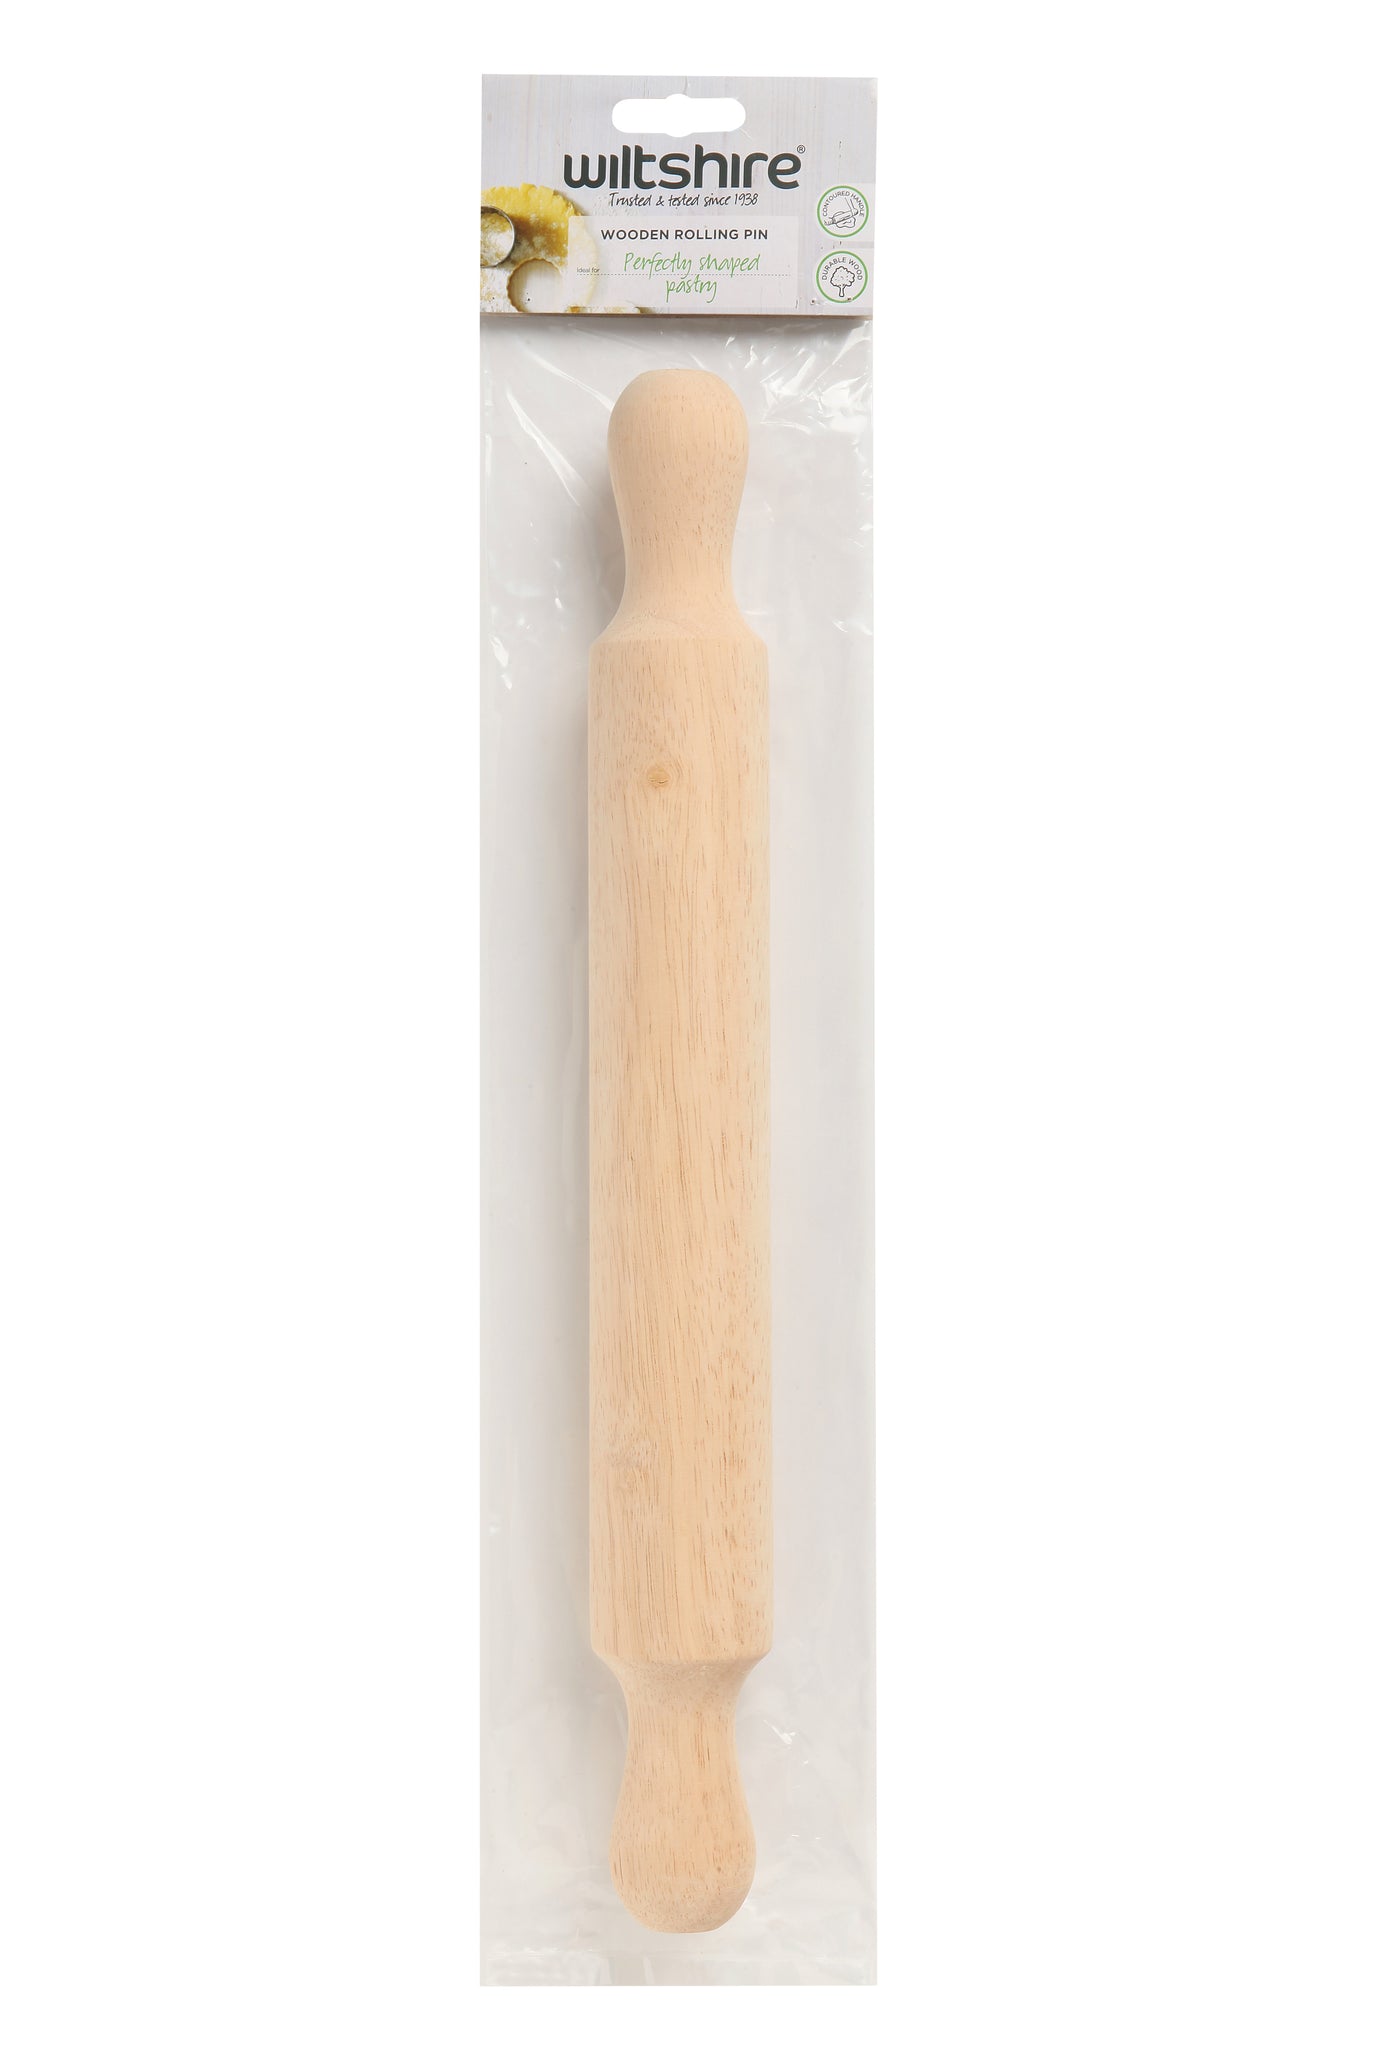 Wiltshire Wooden Rolling Pin 38cm